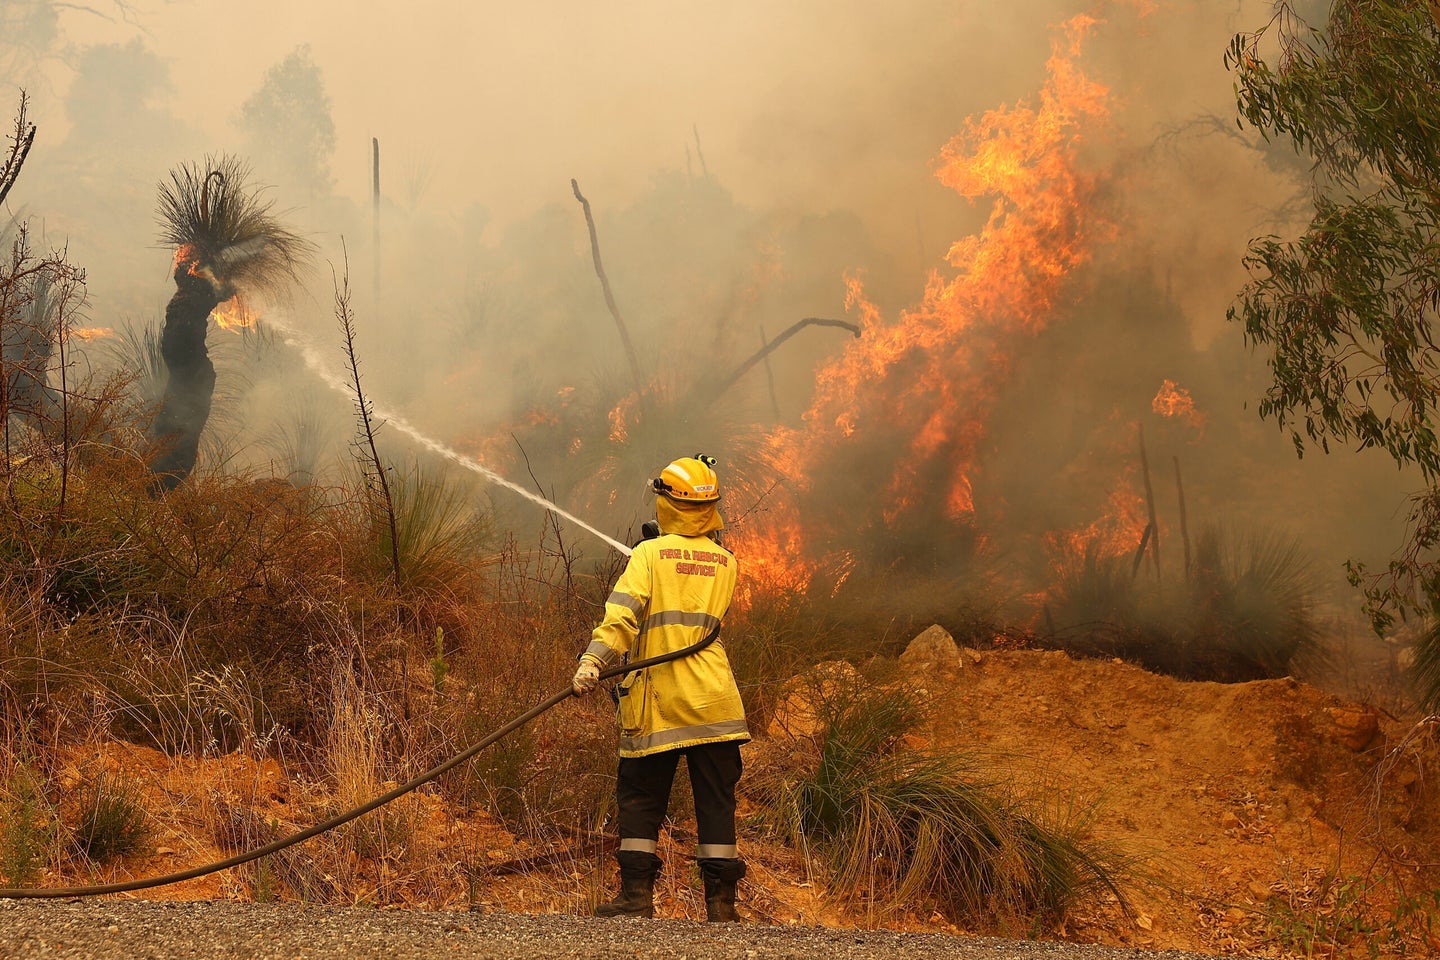 Climate scientists are increasingly capable of identifying how anthropogenic warming has exacerbated specific extreme weather events, such as the devastating wildfires that hit Australia in 2019 and 2020.